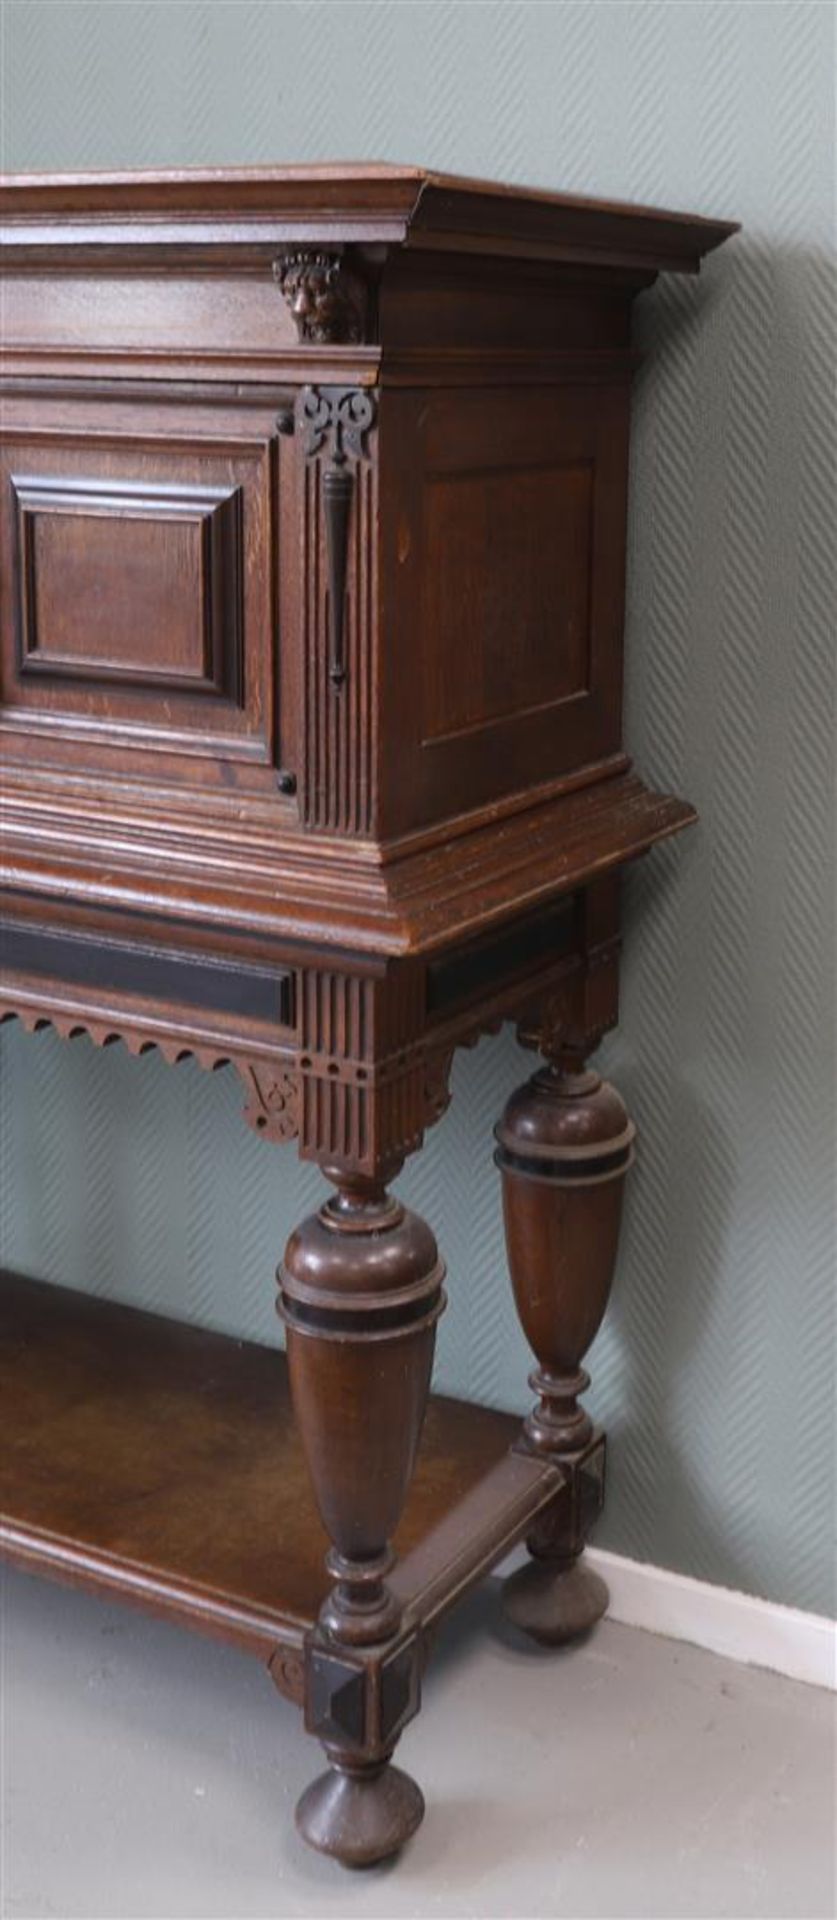 A cabinet with panel doors in the upper cabinet, Renaissance style, around 1900 - Image 3 of 3